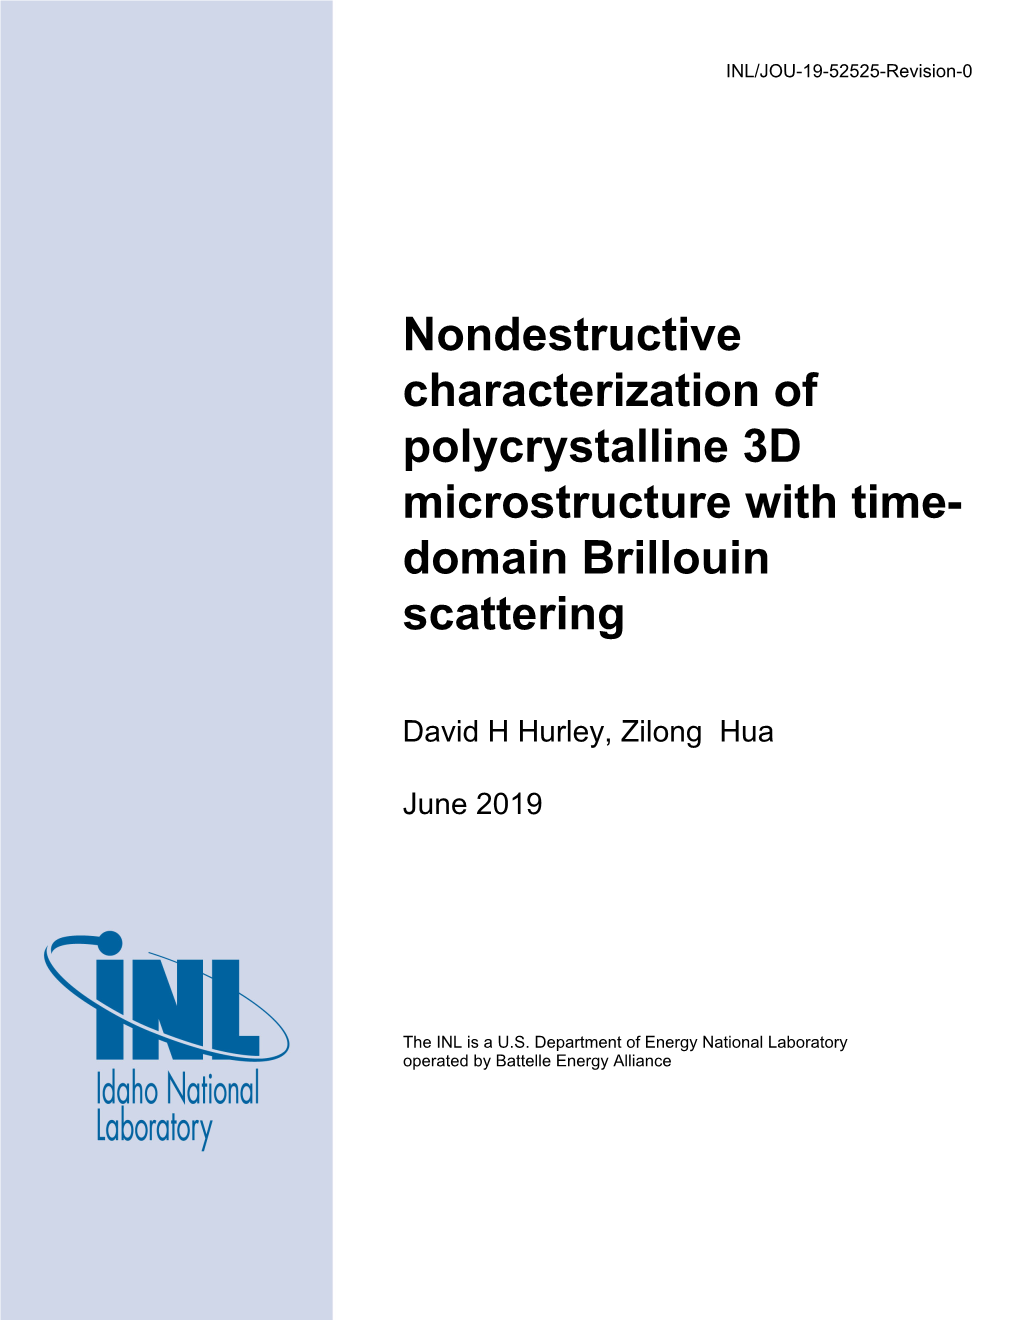 Nondestructive Characterization of Polycrystalline 3D Microstructure with Time- Domain Brillouin Scattering